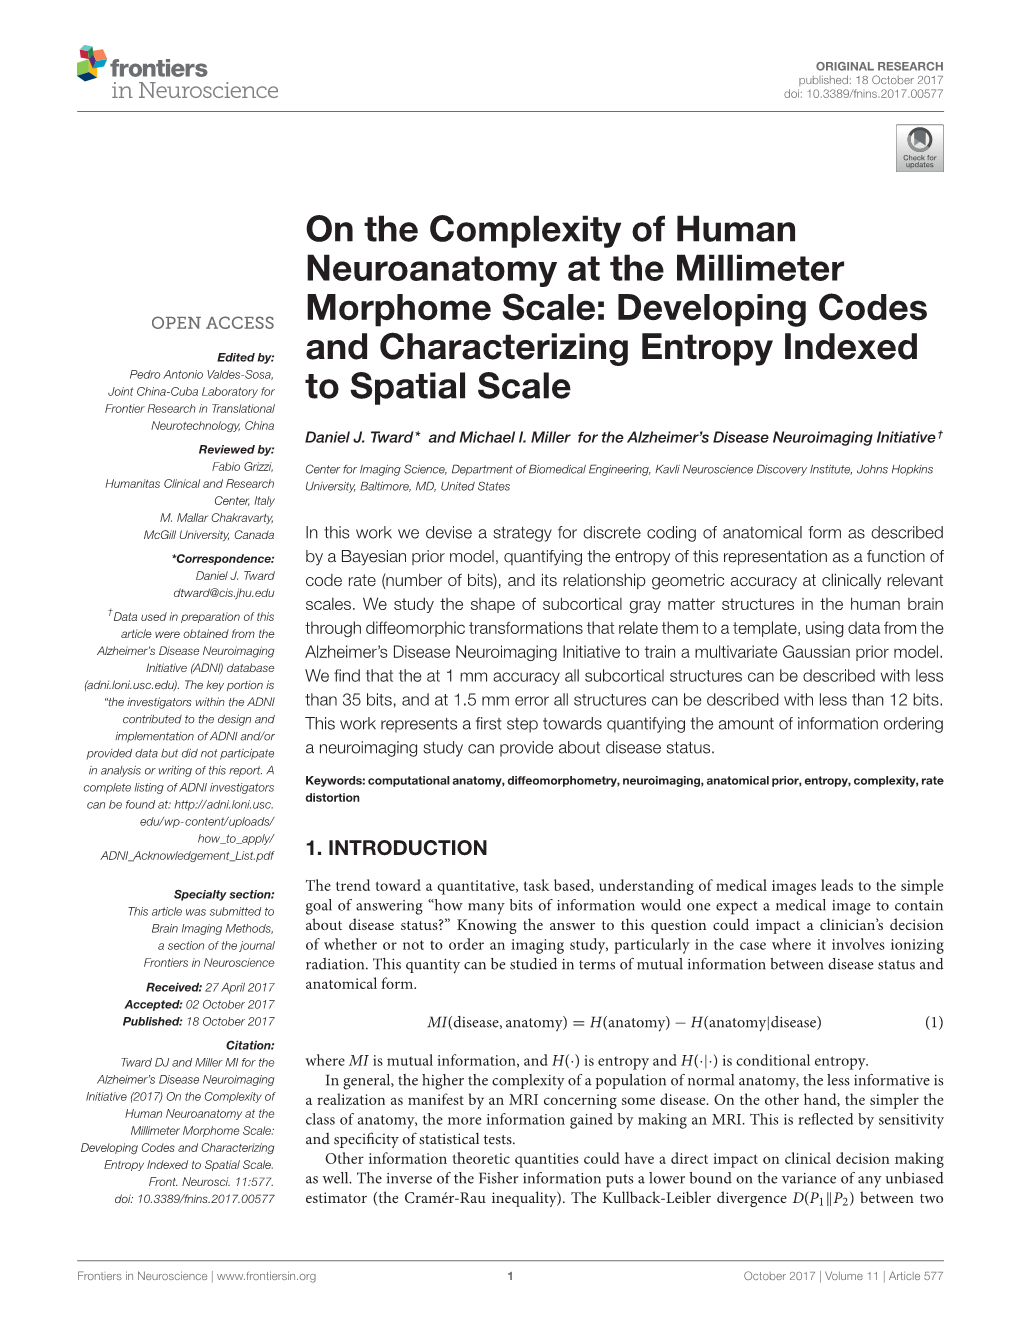 On the Complexity of Human Neuroanatomy at the Millimeter Morphome Scale: Developing Codes and Characterizing Entropy Indexed To